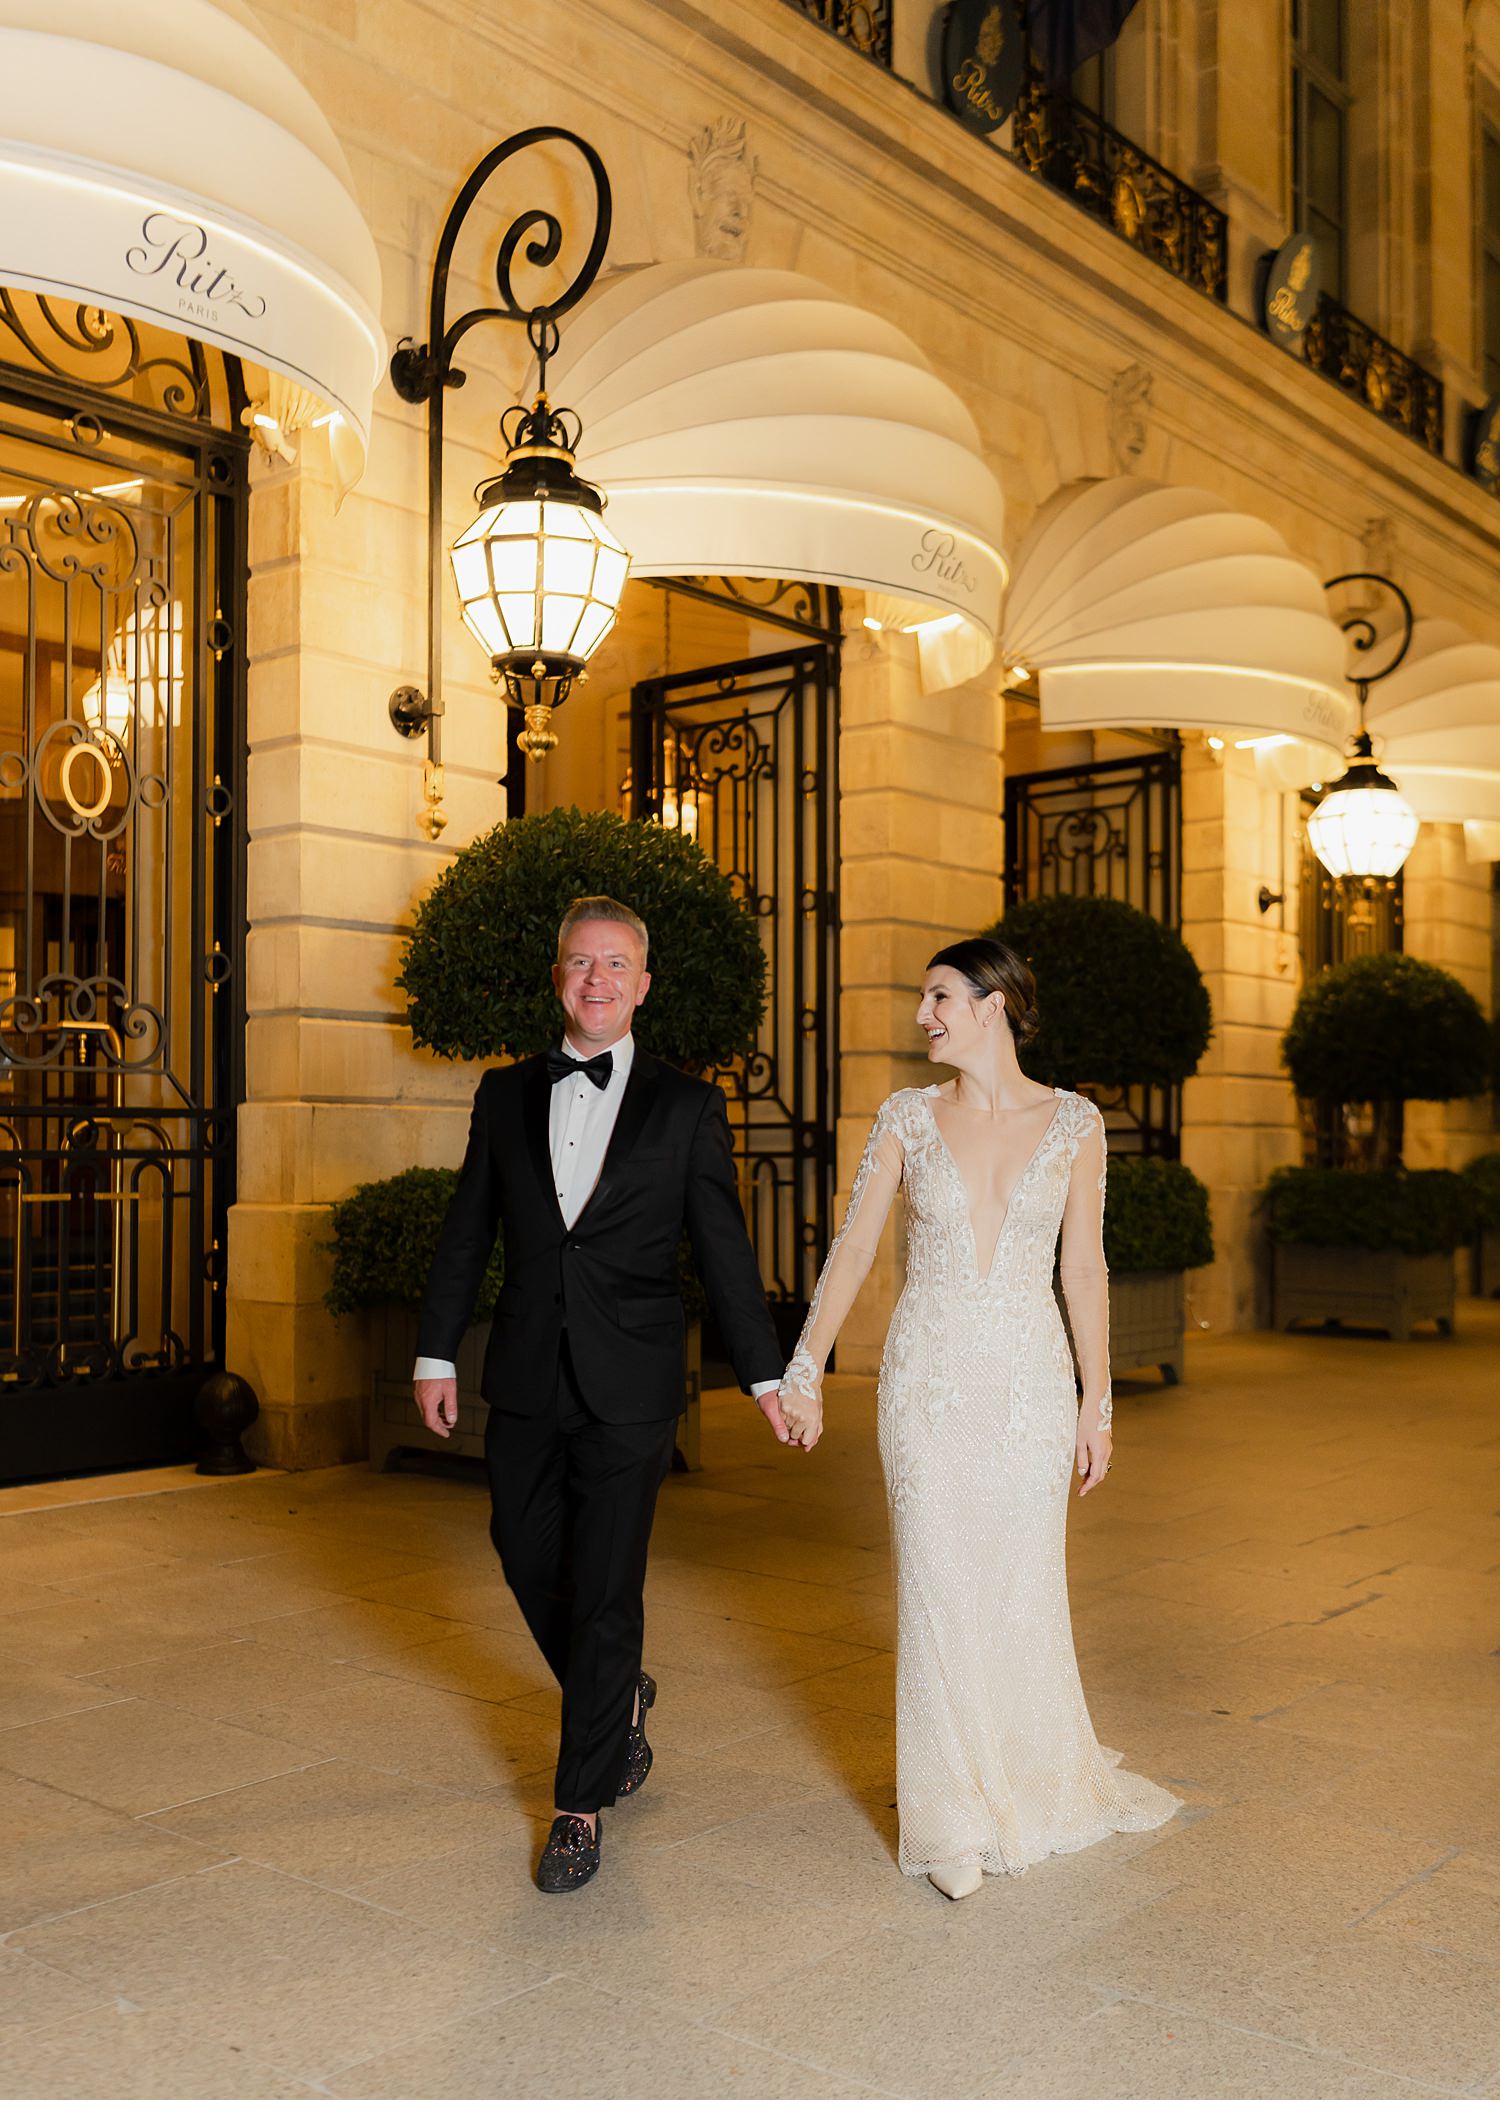 Nighttime bride and groom portraits outside the Ritz Paris, Elopement at the Ritz in Paris, Paris by night, Night time elopement in Paris